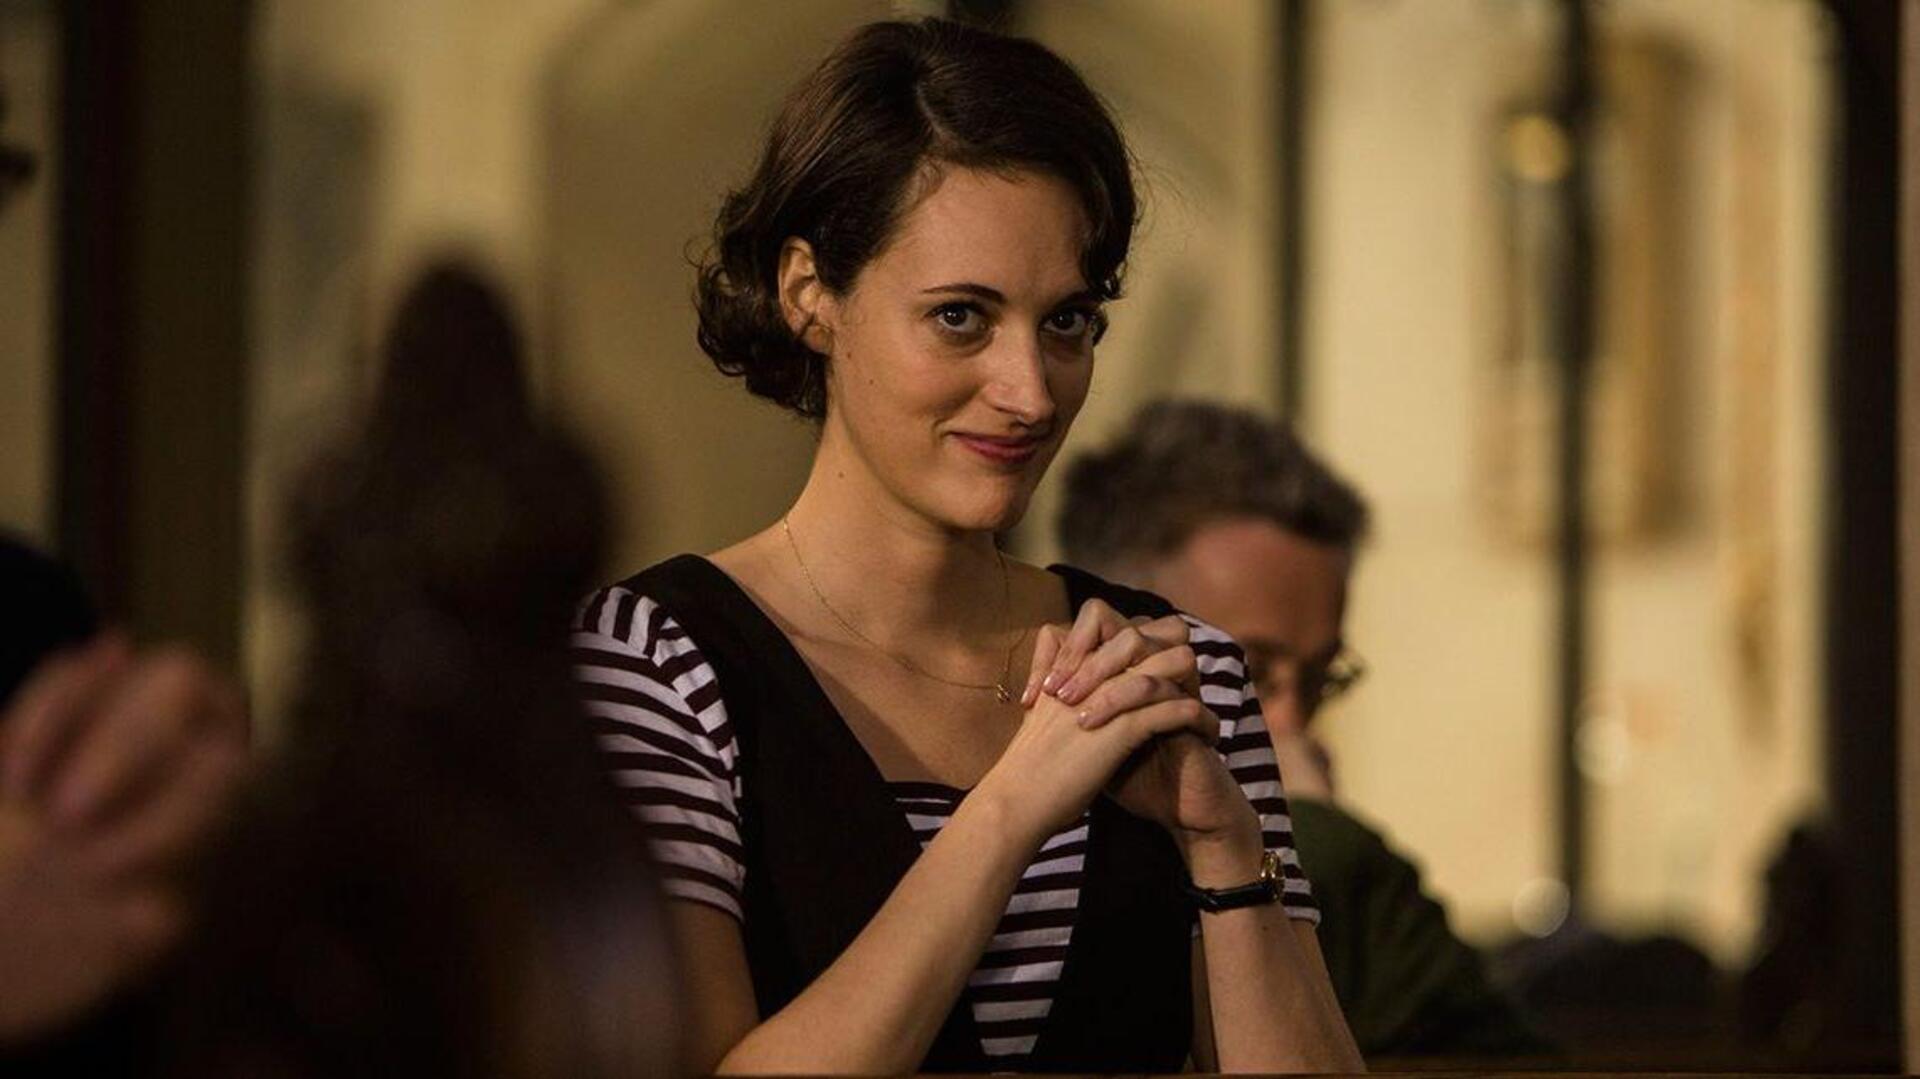 'Gilmore Girls' to 'Fleabag': Top shows directed by women